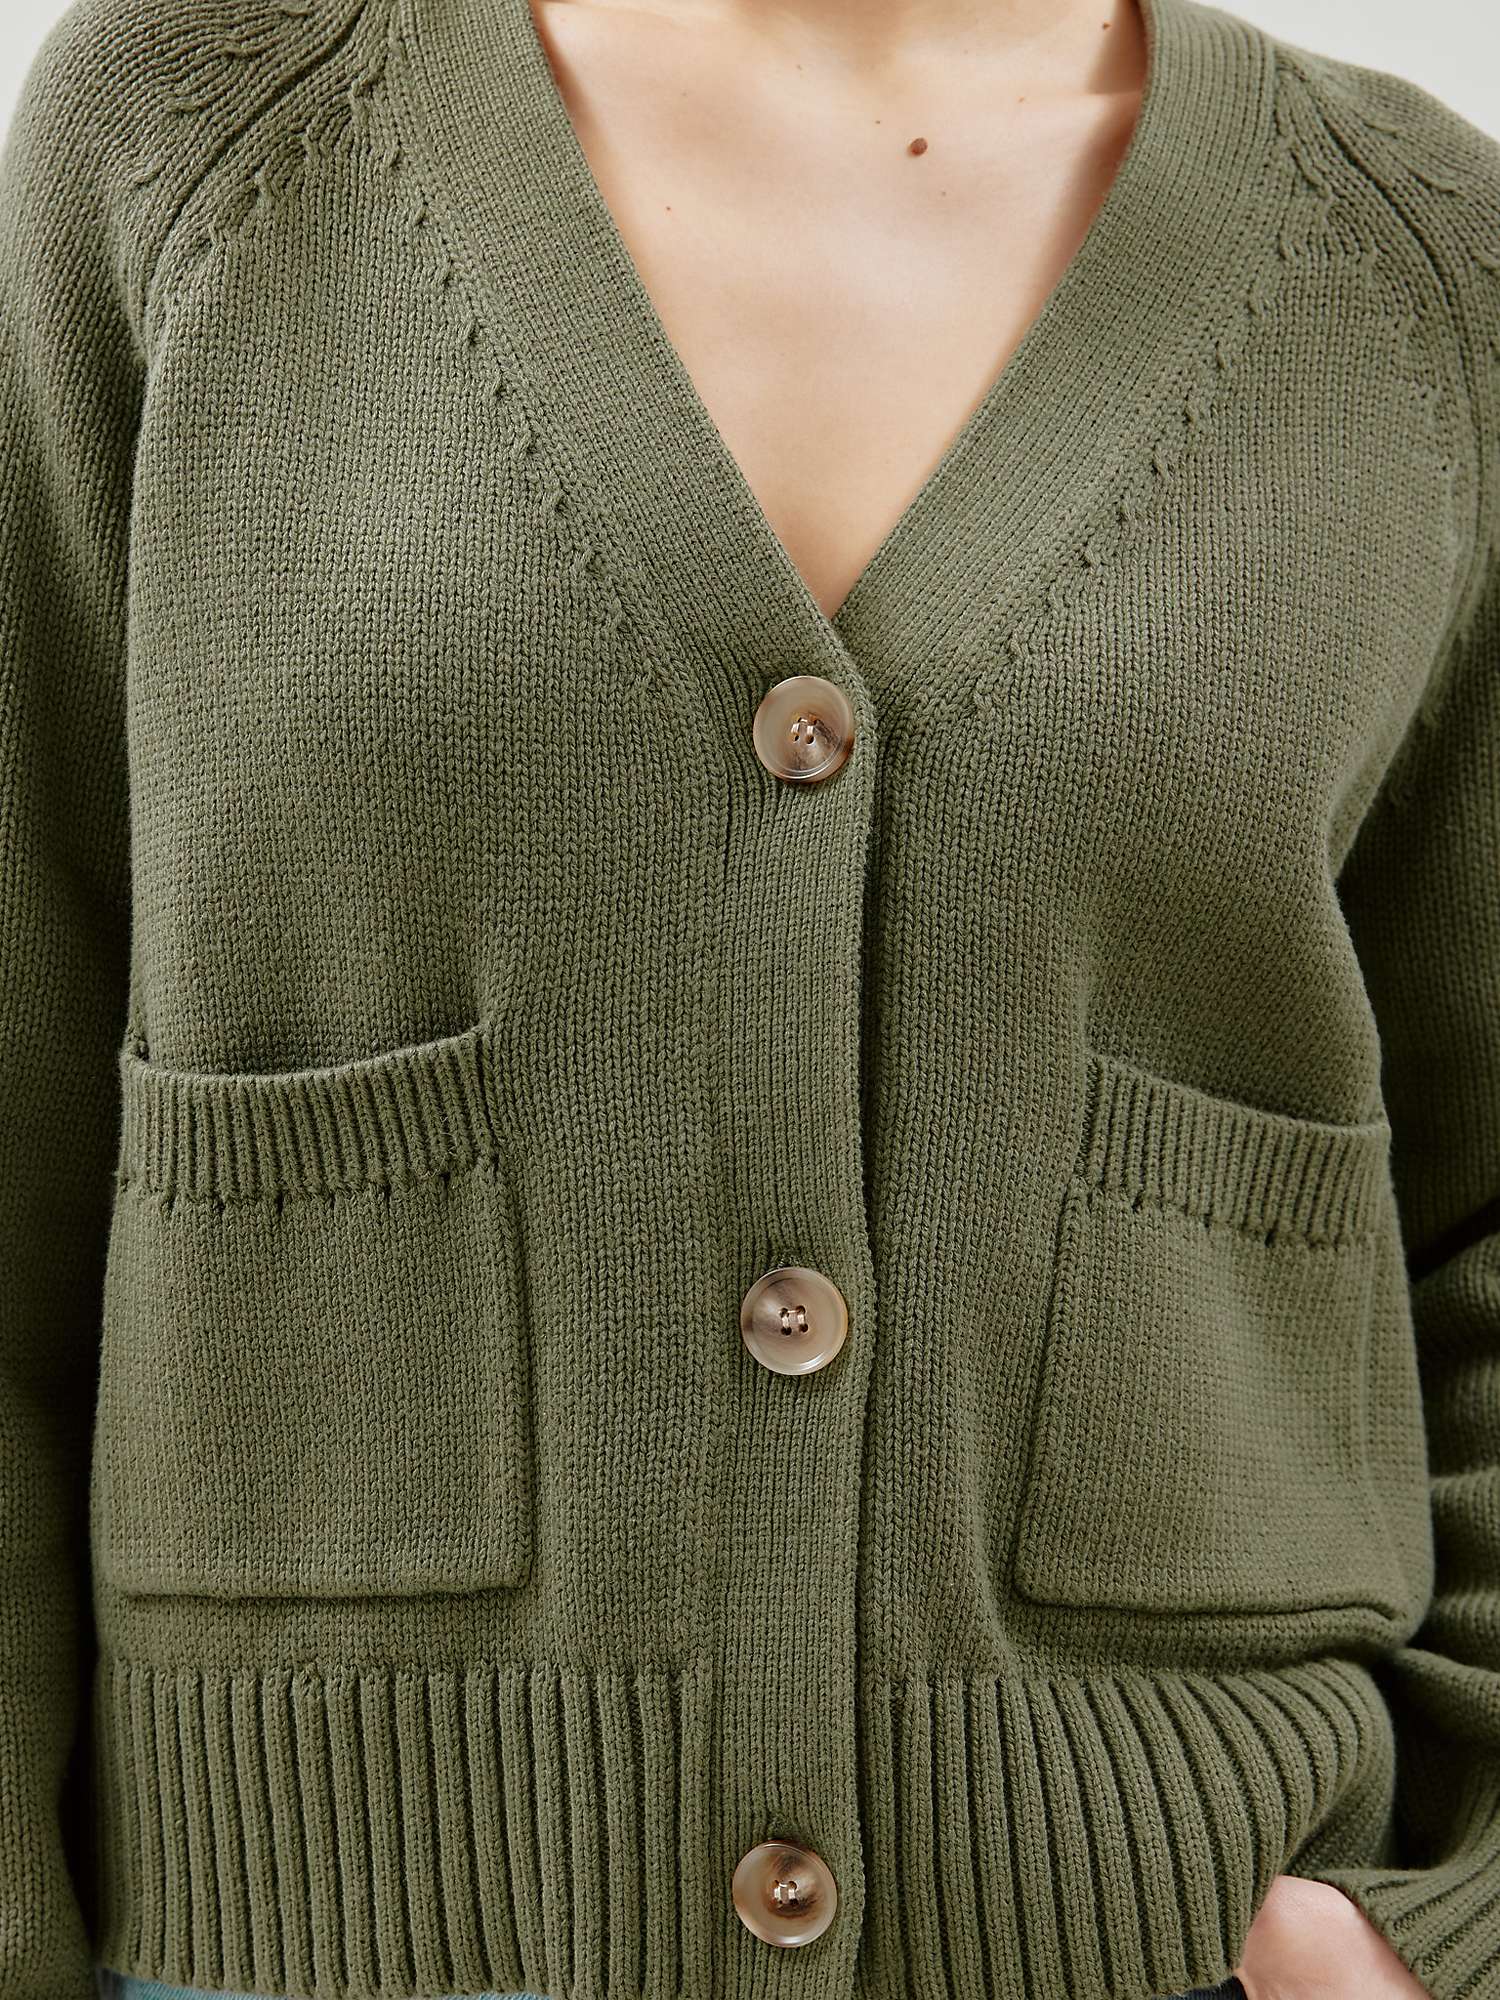 Buy Albaray Relaxed Cotton Cardigan, Olive Online at johnlewis.com